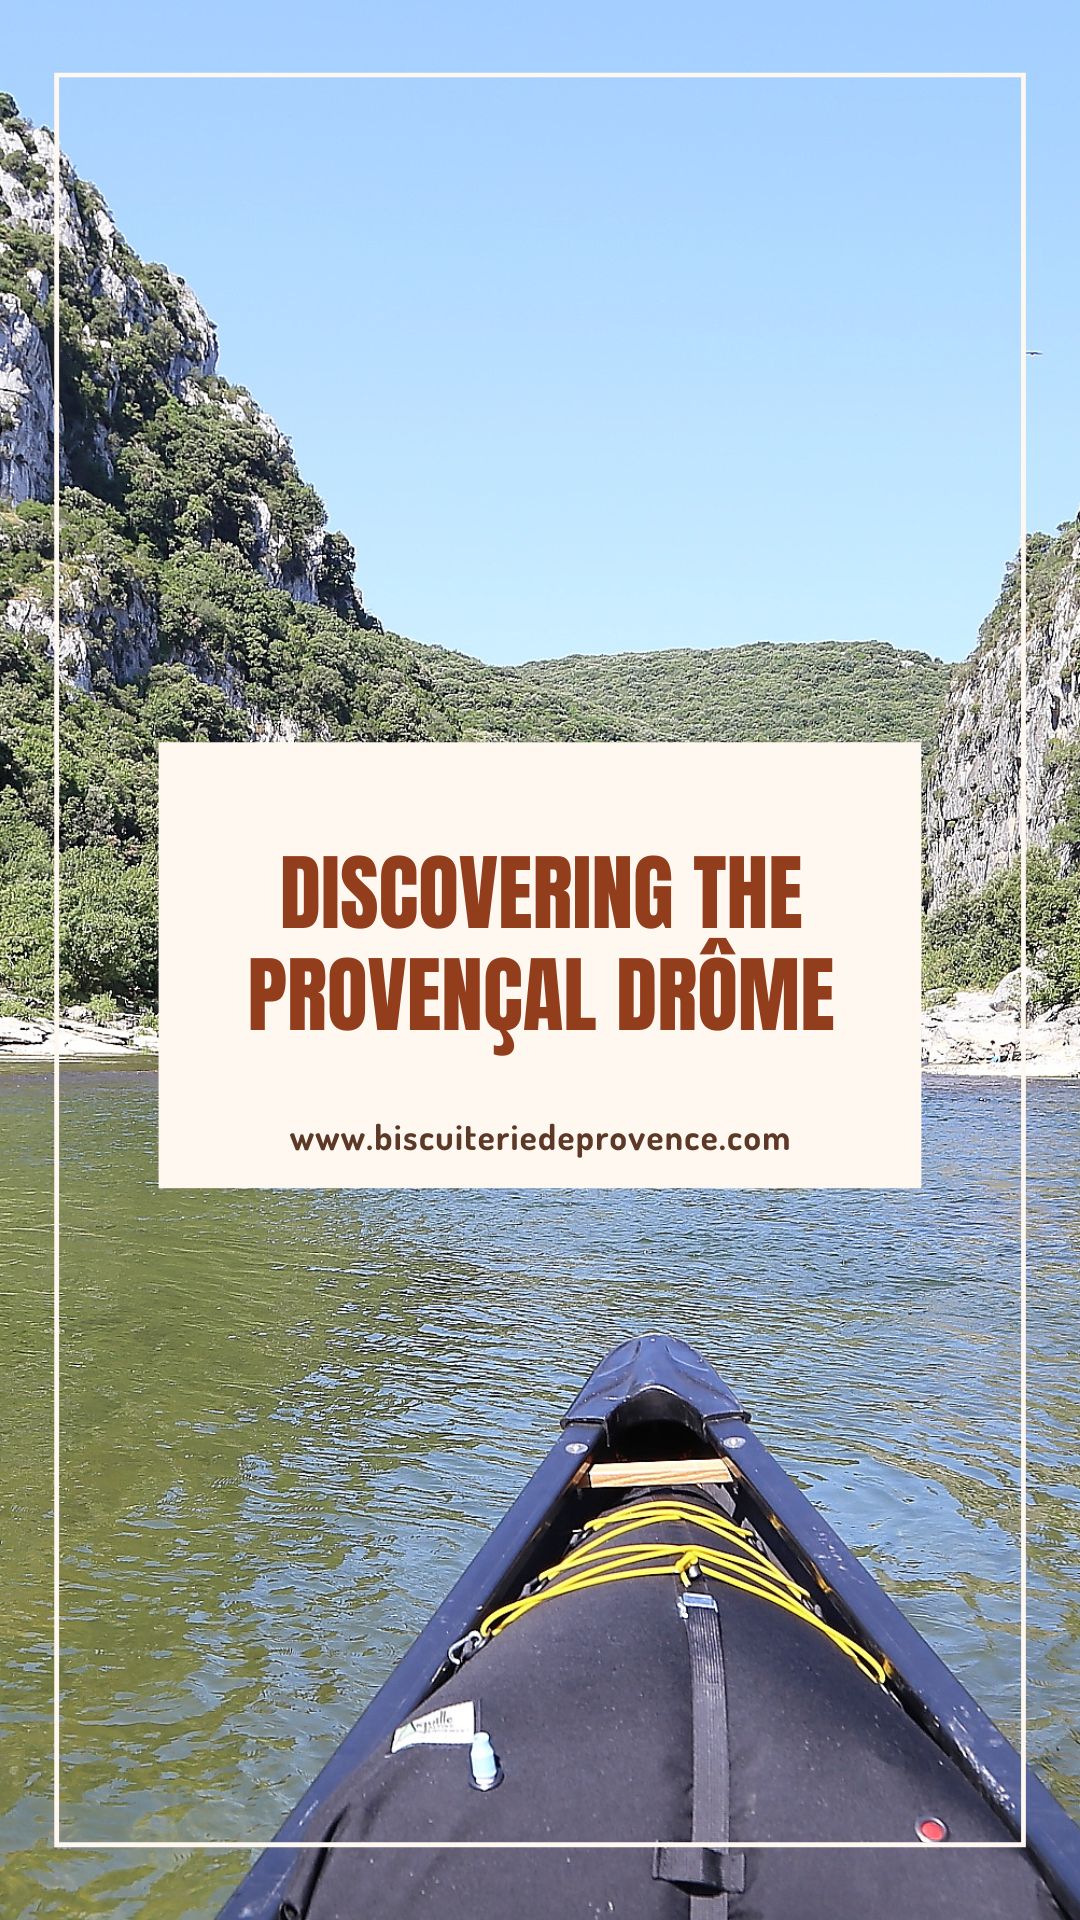 Discovering the provencal drome